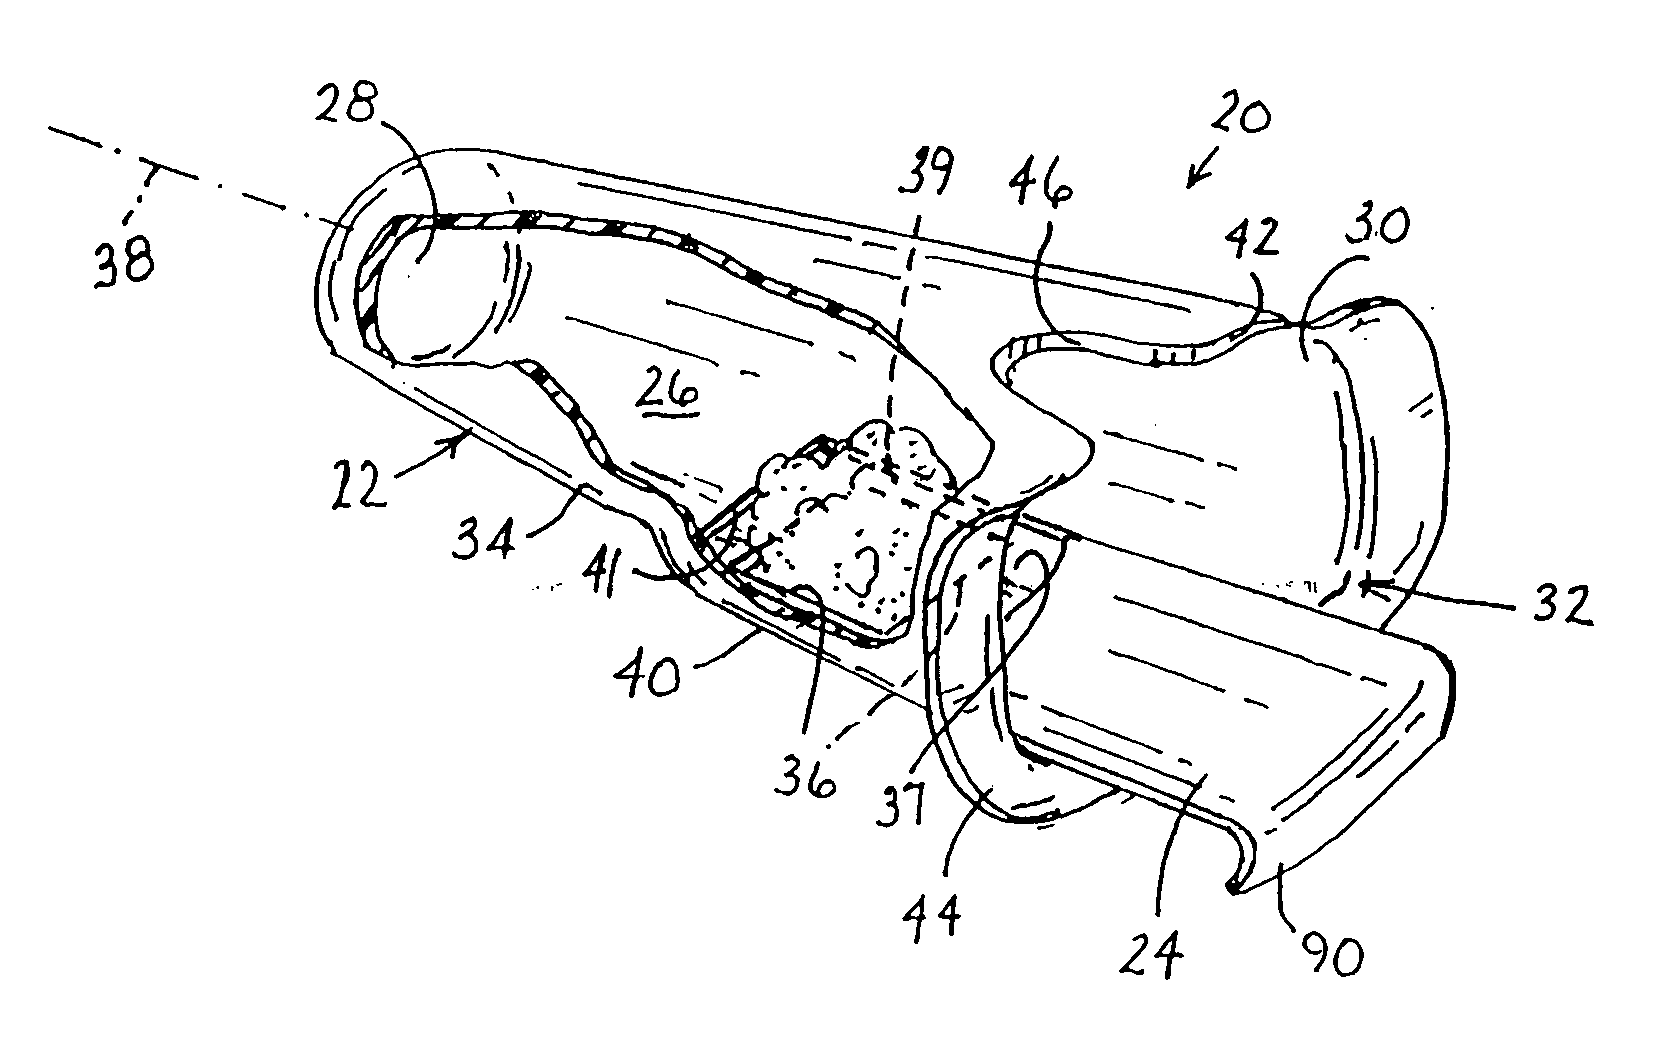 Endoluminal treatment method and associated surgical assembly including tissue occlusion device